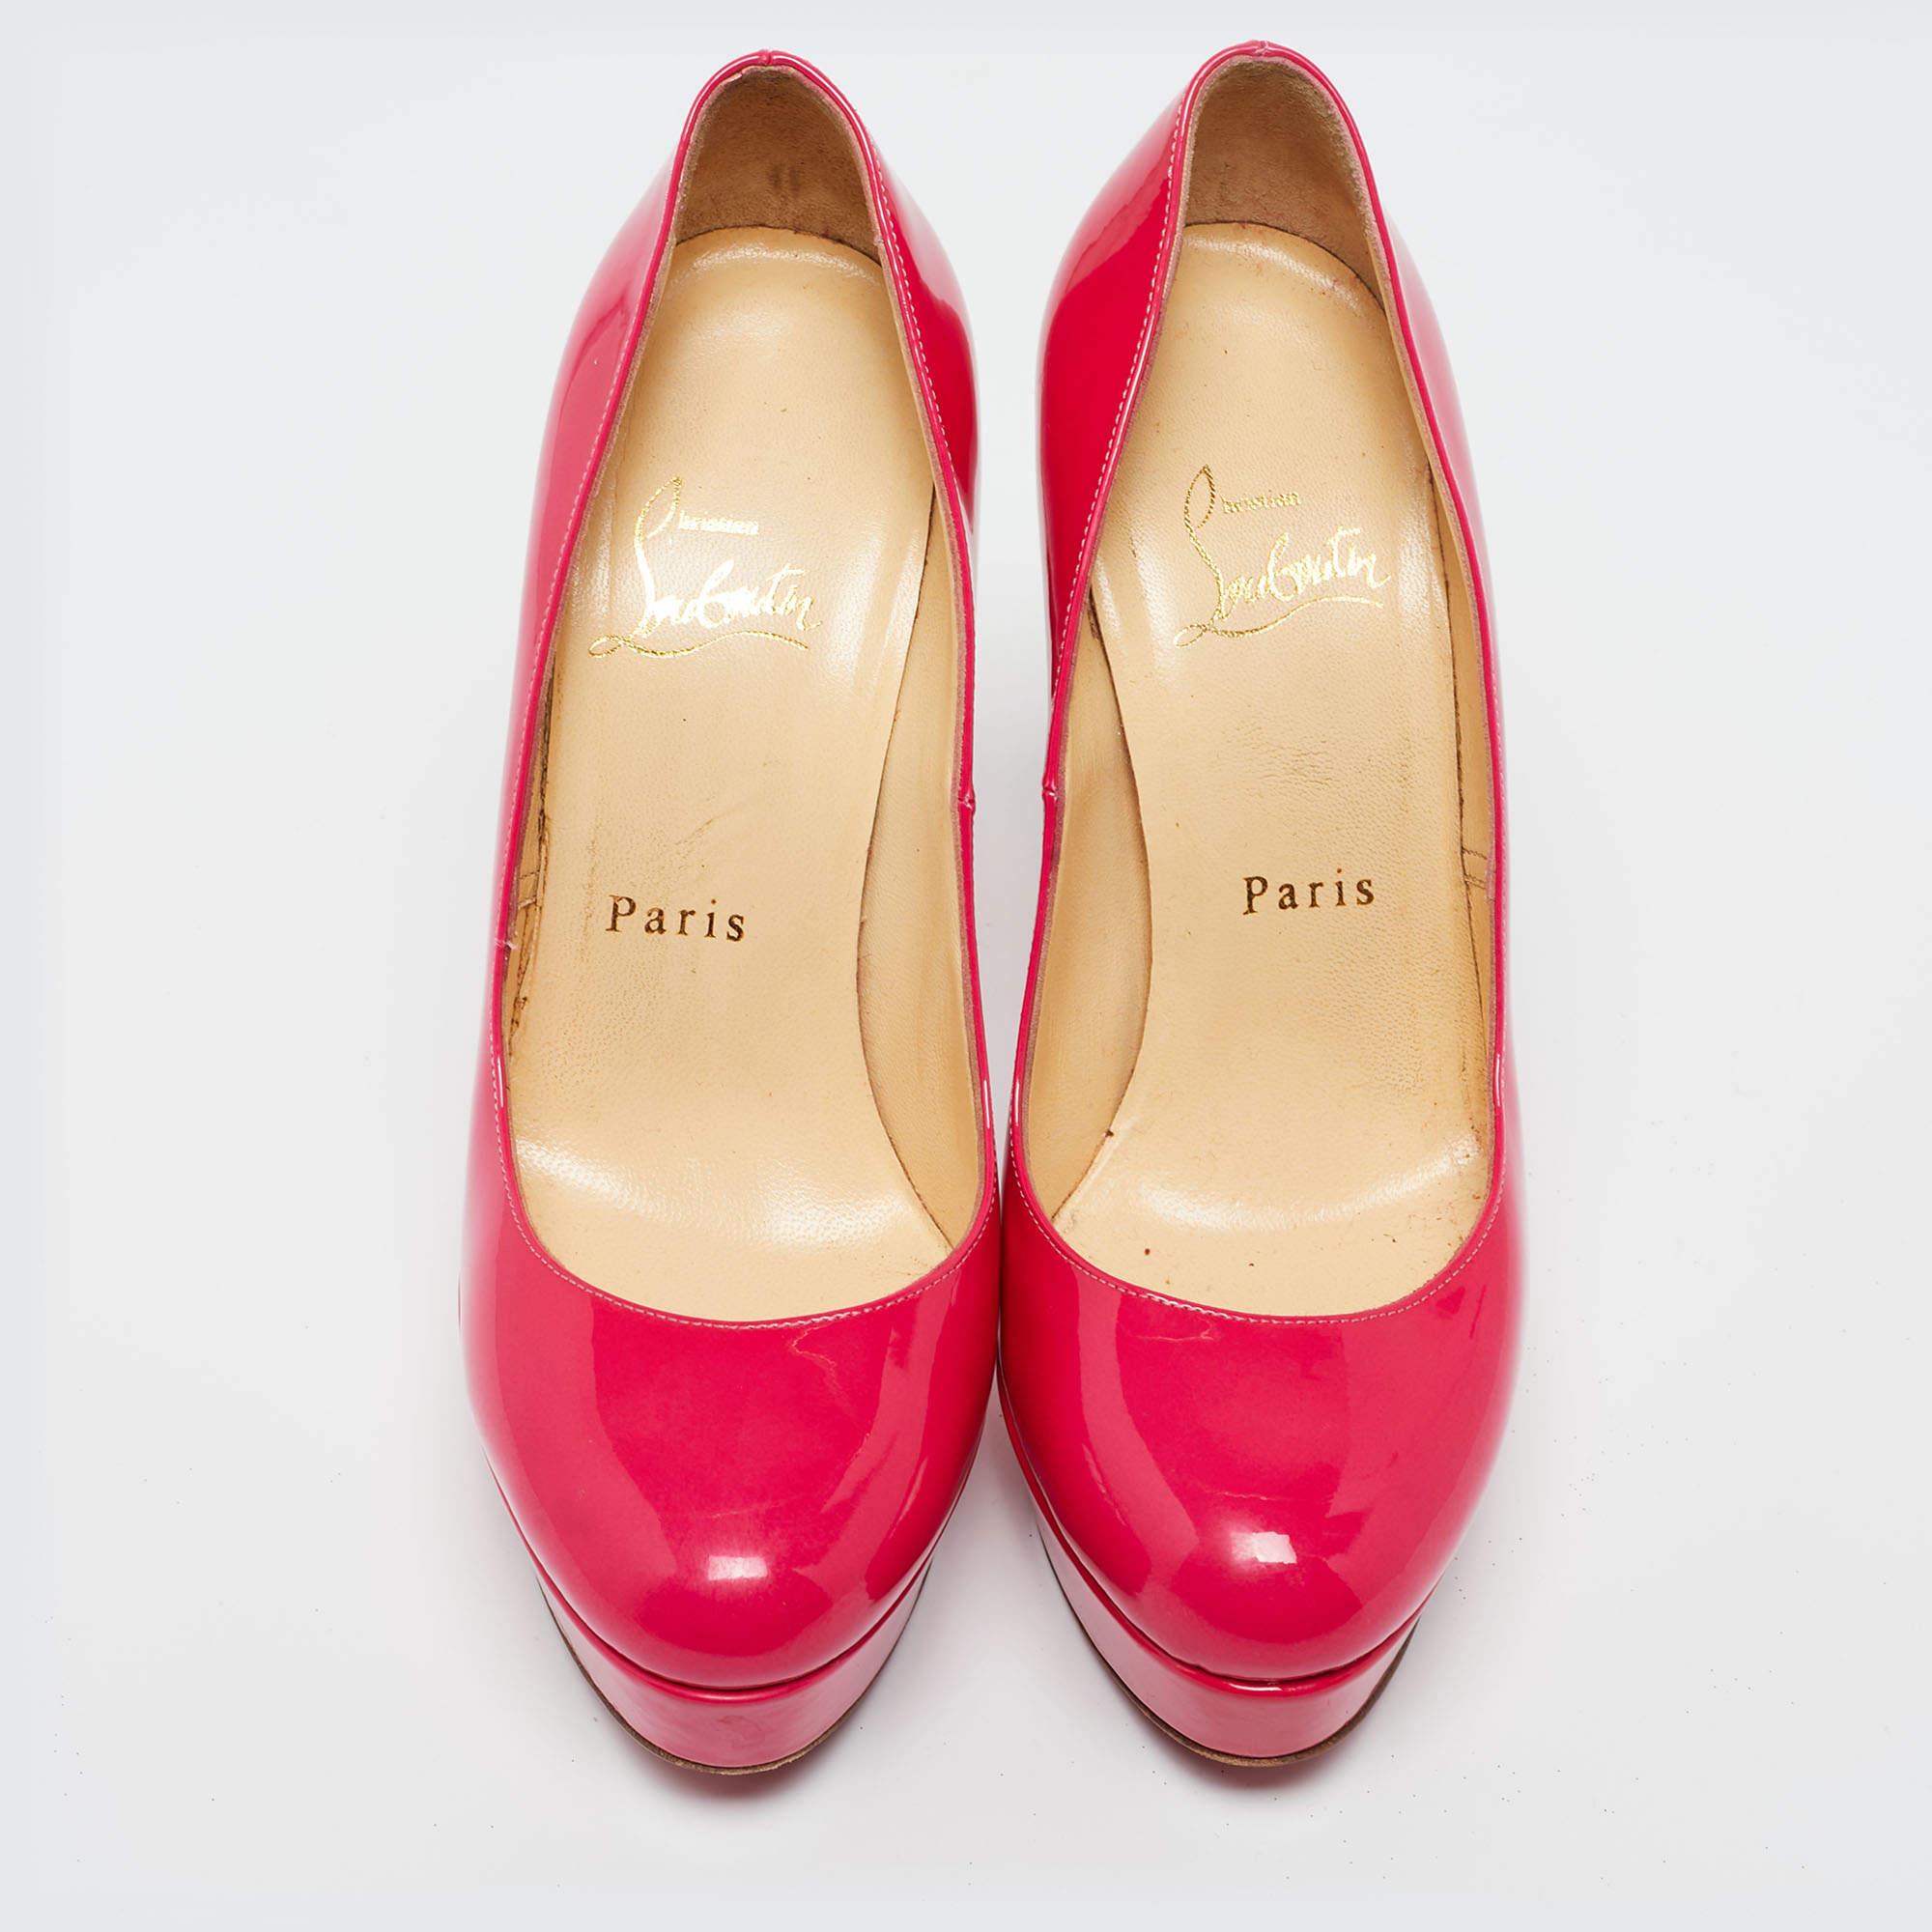 Christian Louboutin Neon Pink Patent Leather Bianca Pumps Size 36 In Good Condition For Sale In Dubai, Al Qouz 2